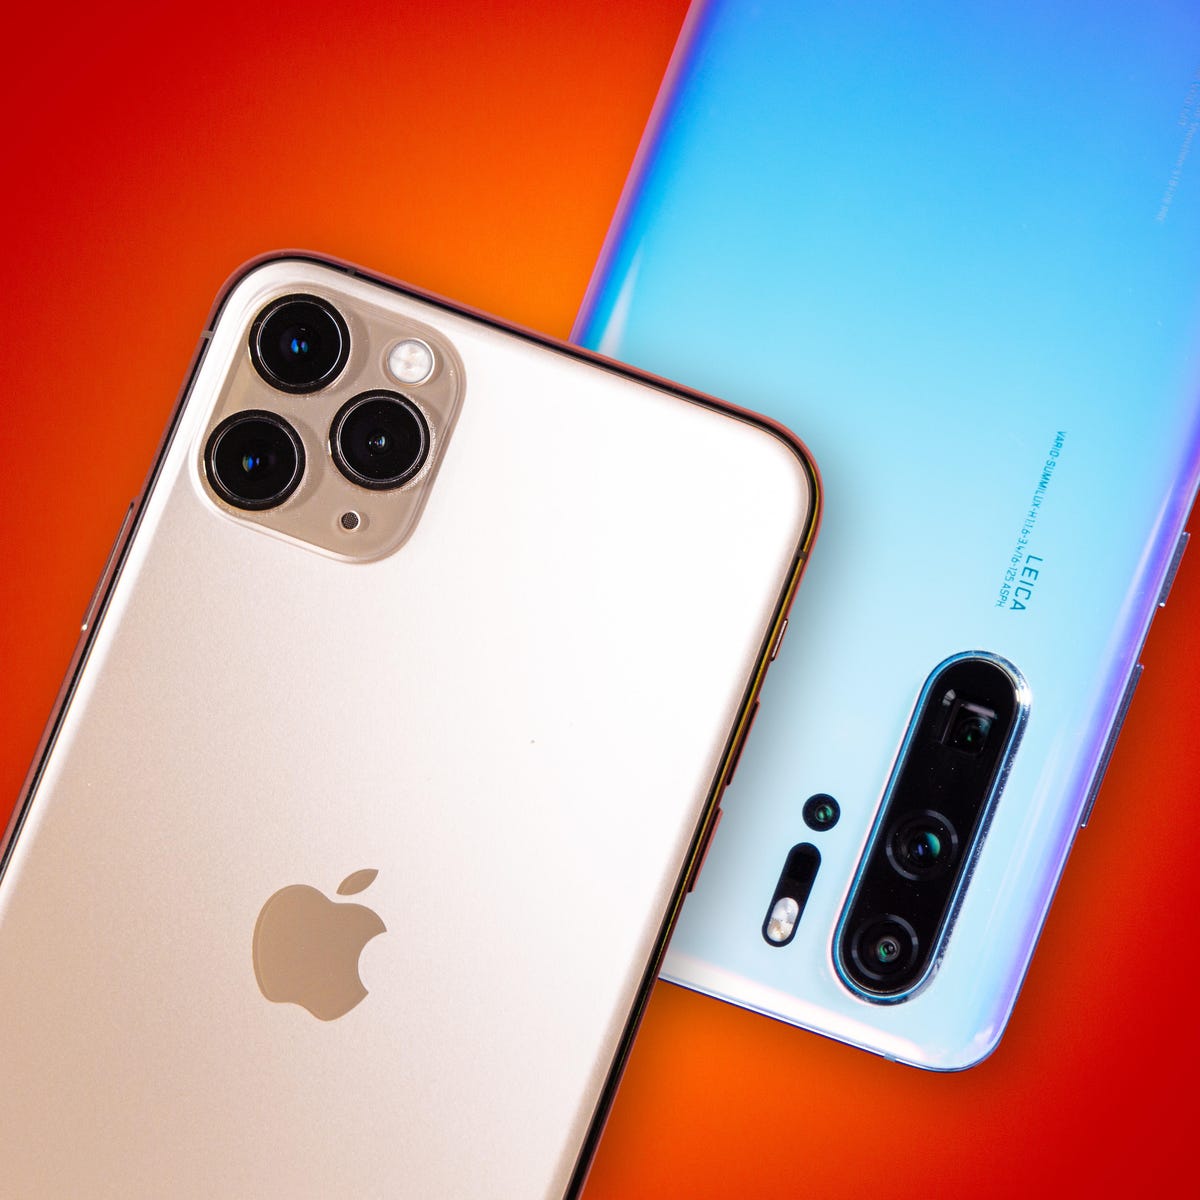 holte bad Leger Apple iPhone 11 Pro Max vs. Huawei P30 Pro: Whose cameras are king? - CNET